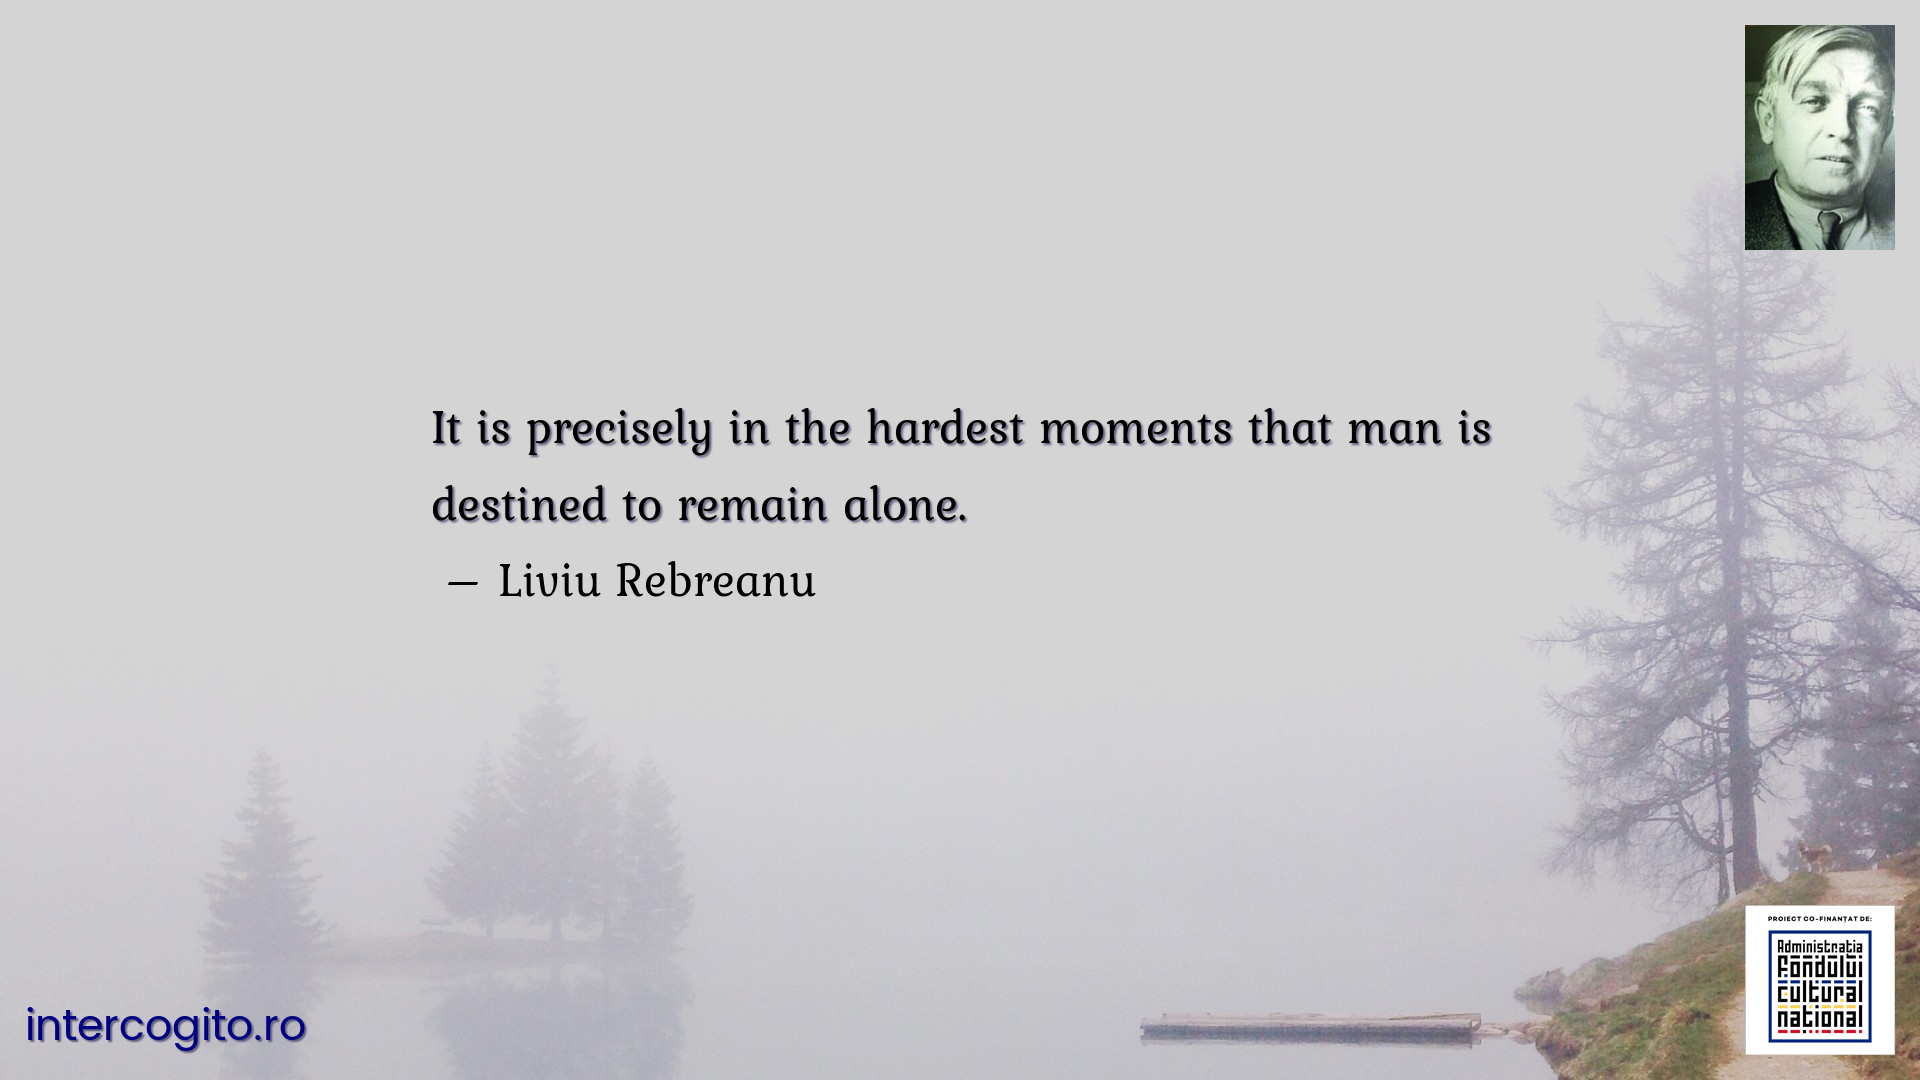 It is precisely in the hardest moments that man is destined to remain alone.